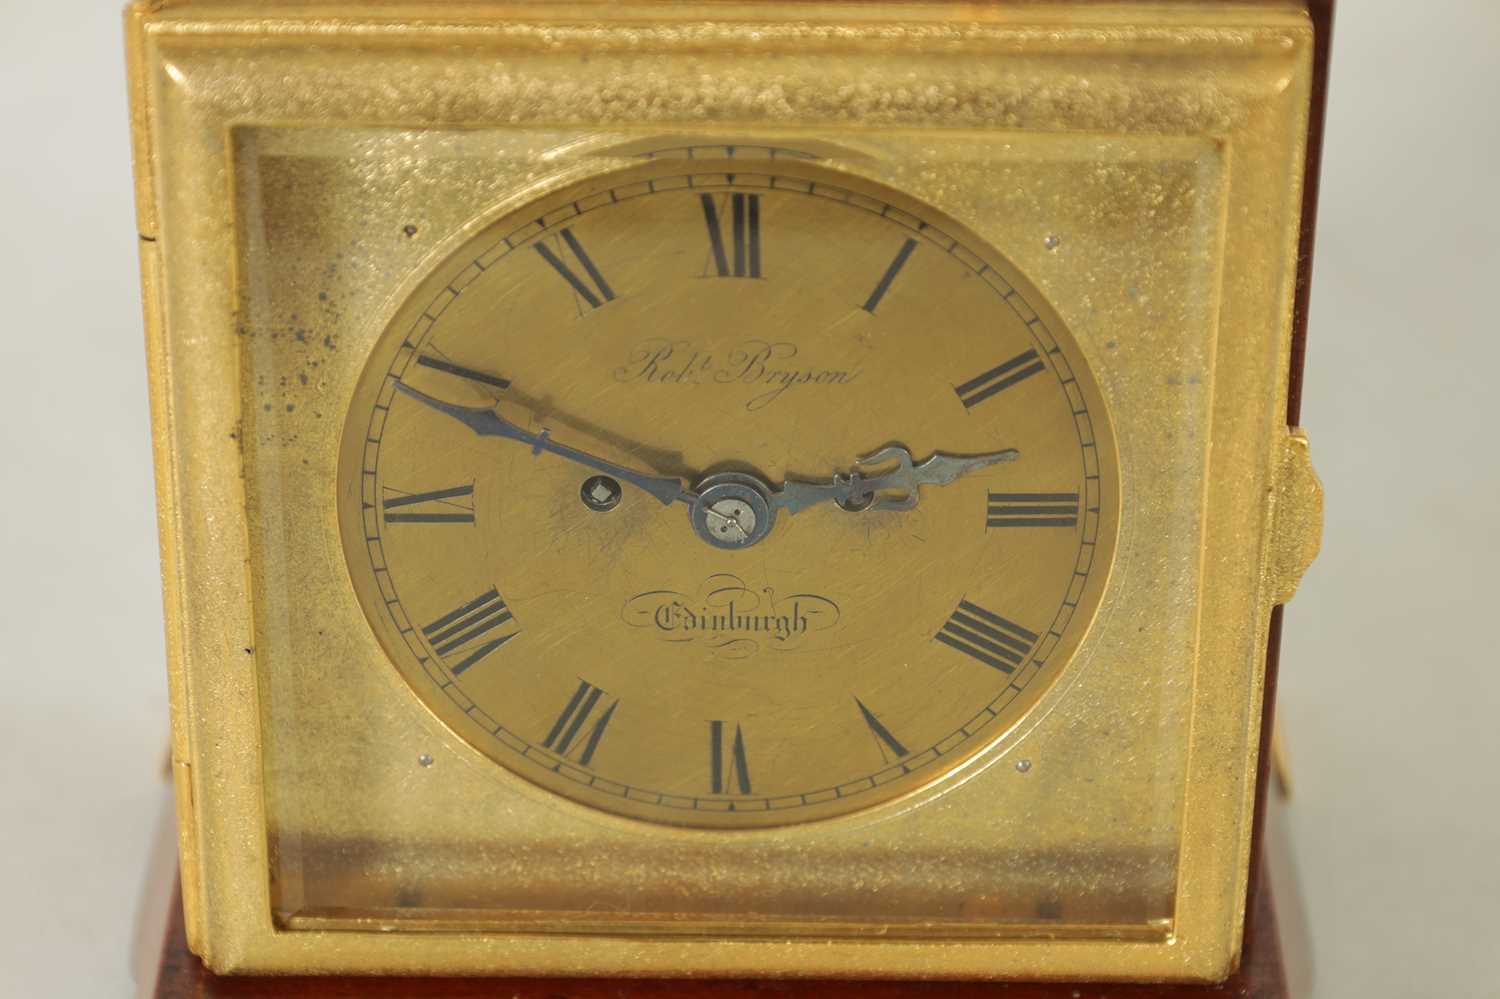 ROBERT BRYSON, EDINBURGH. A LATE 19TH CENTURY DOUBLE FUSEE CARRIAGE TYPE MANTEL CLOCK - Image 3 of 11